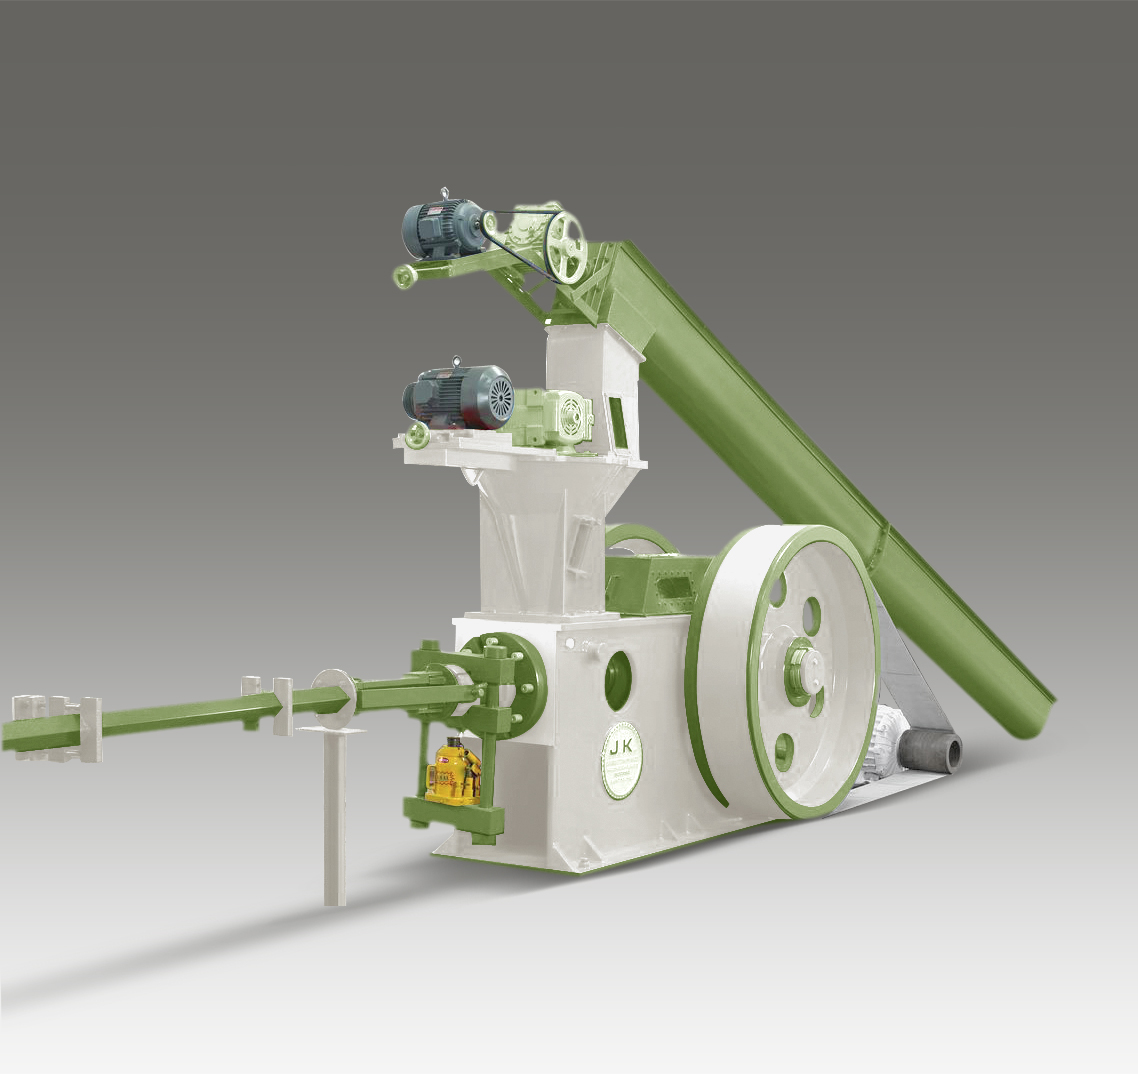 Ground Nuts Shell Briquetting Machine